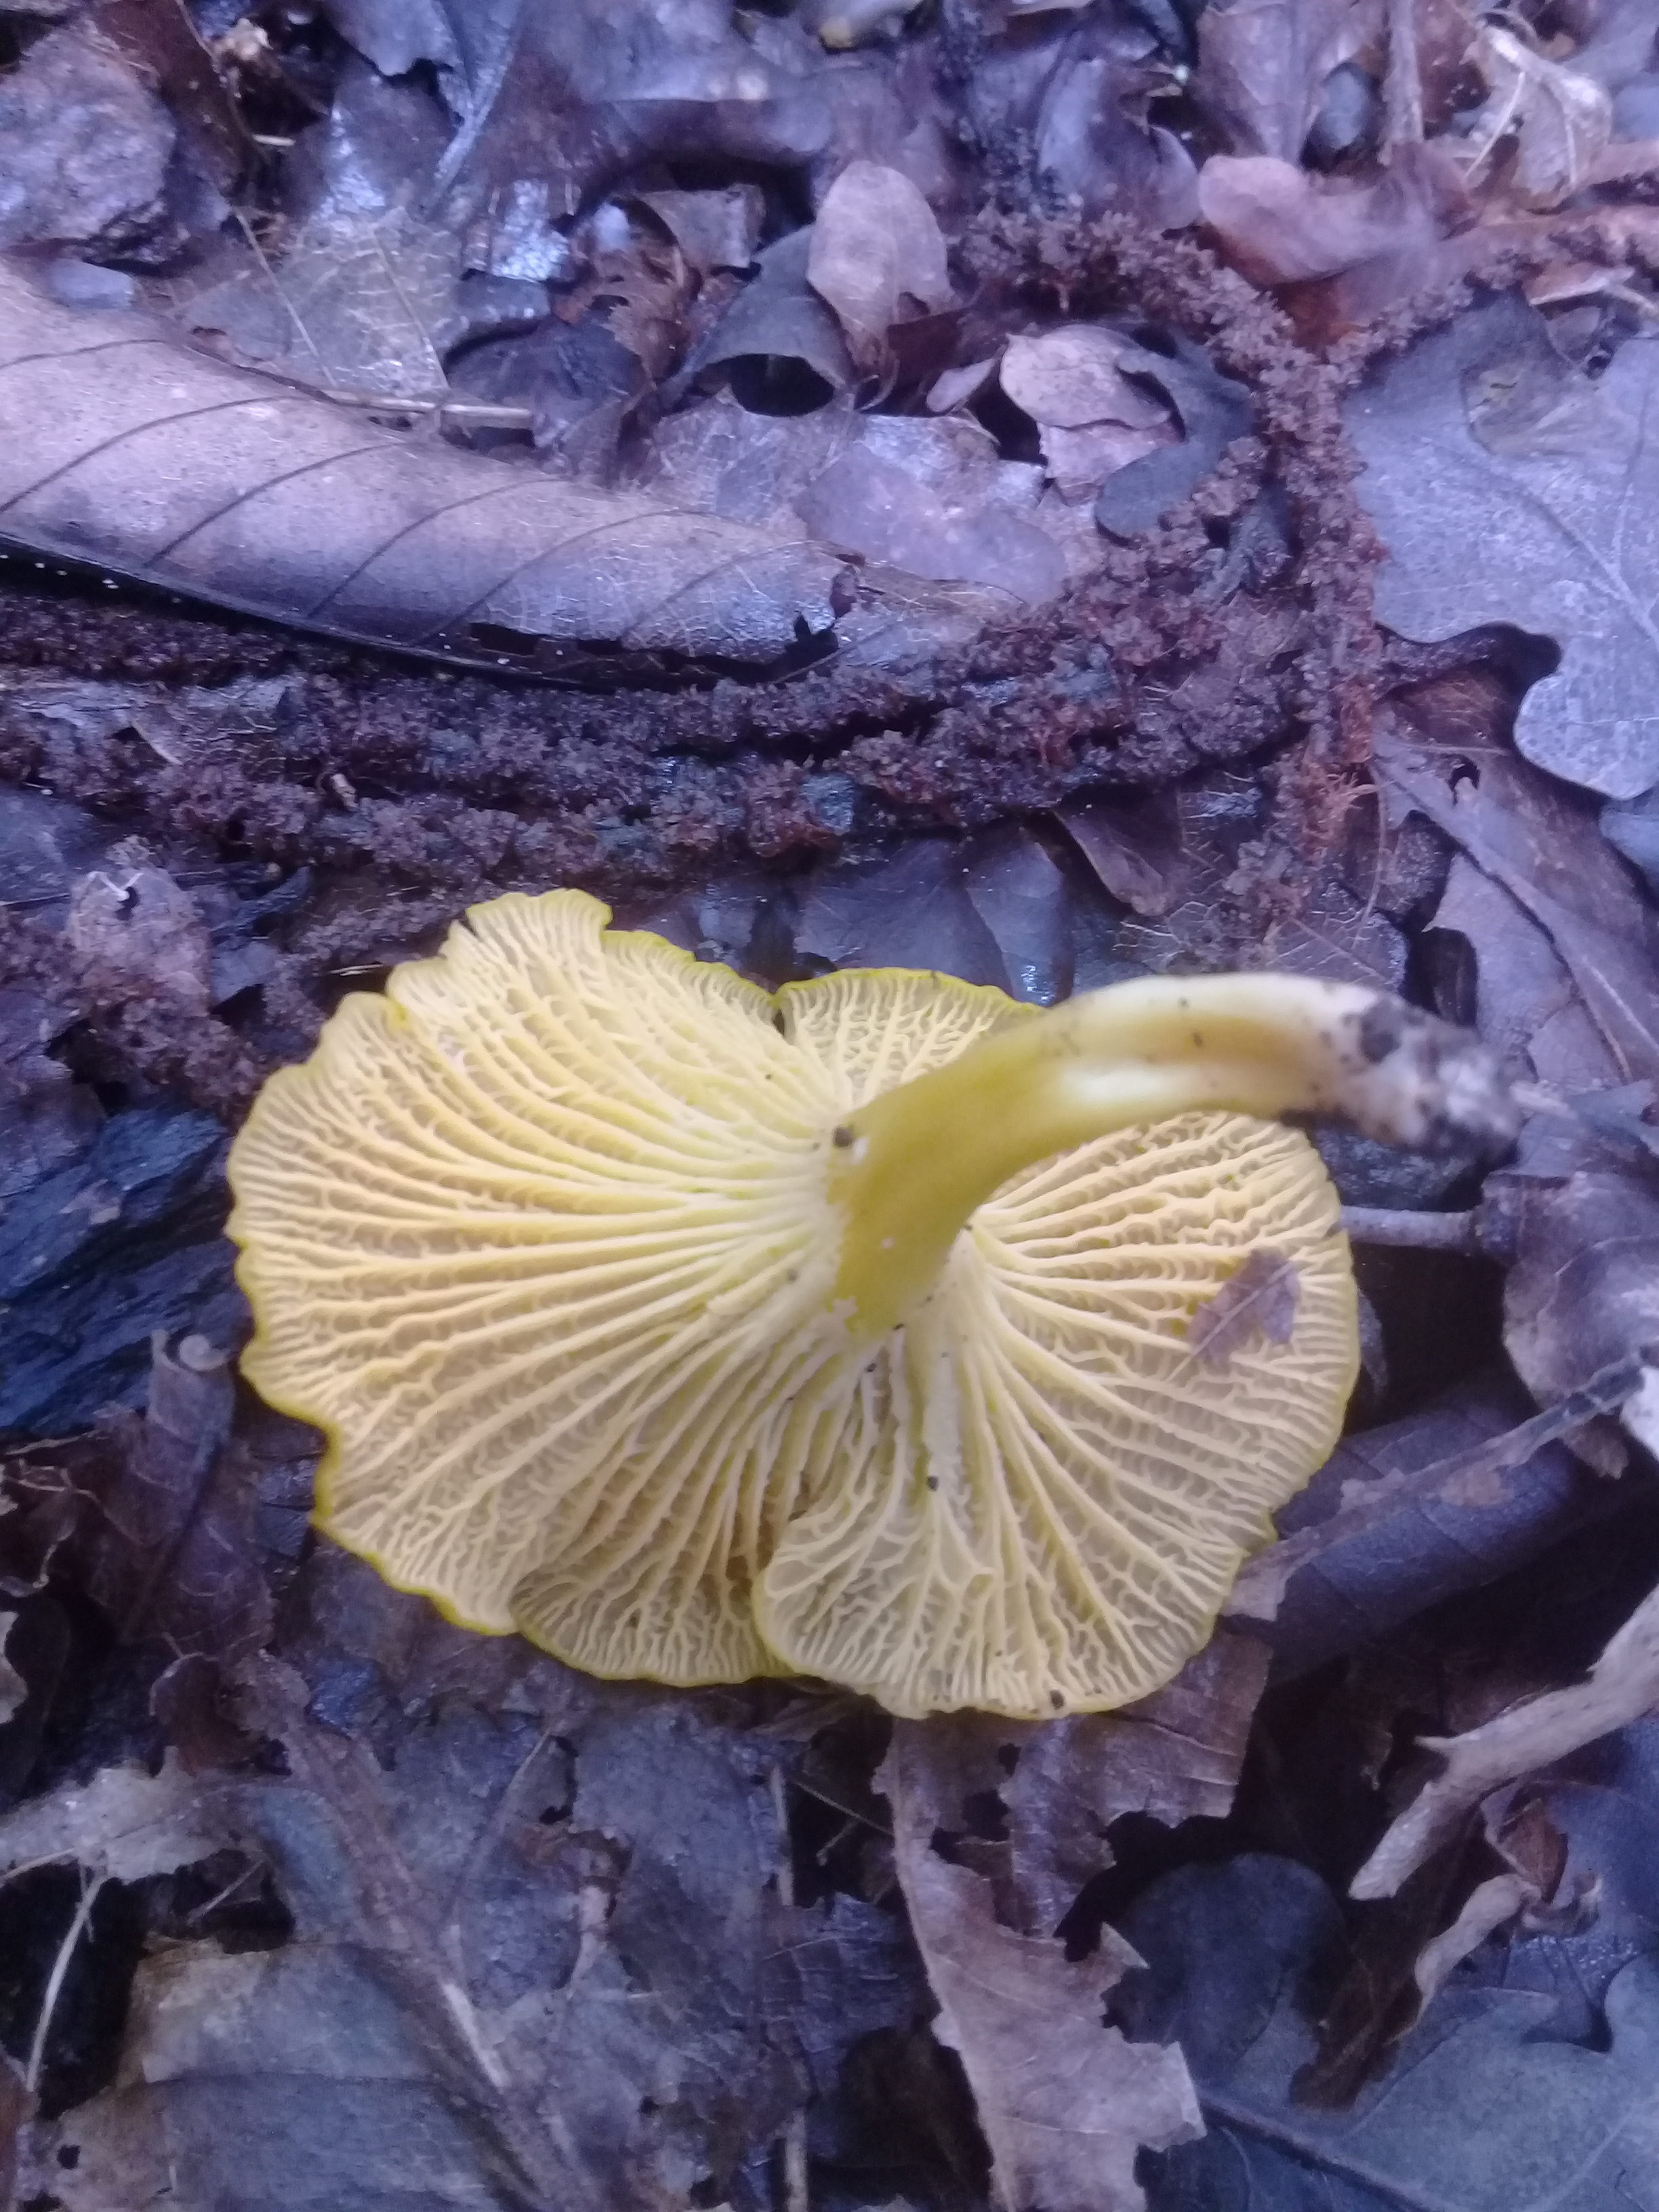 New chanterelle species found in the Dandenongs! - Updated!